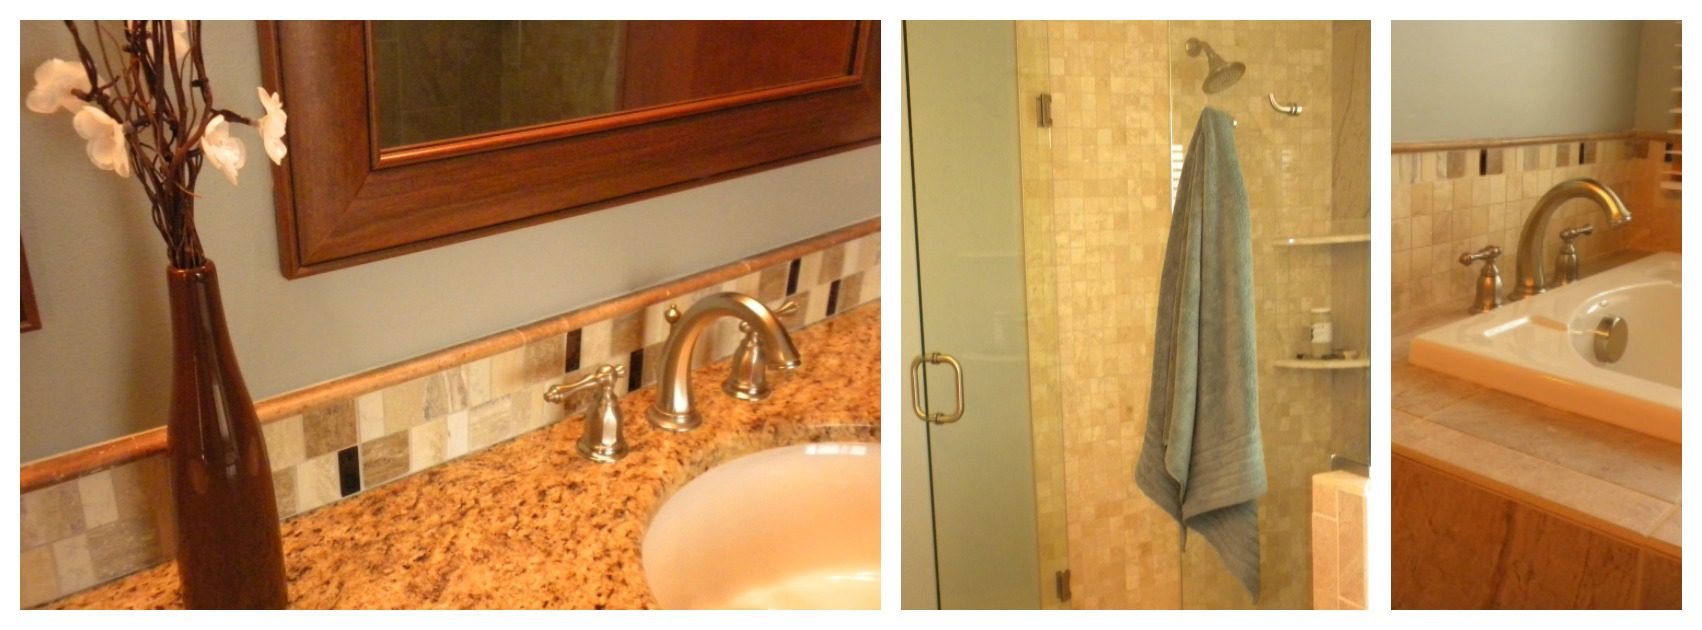 A collage of bathroom features